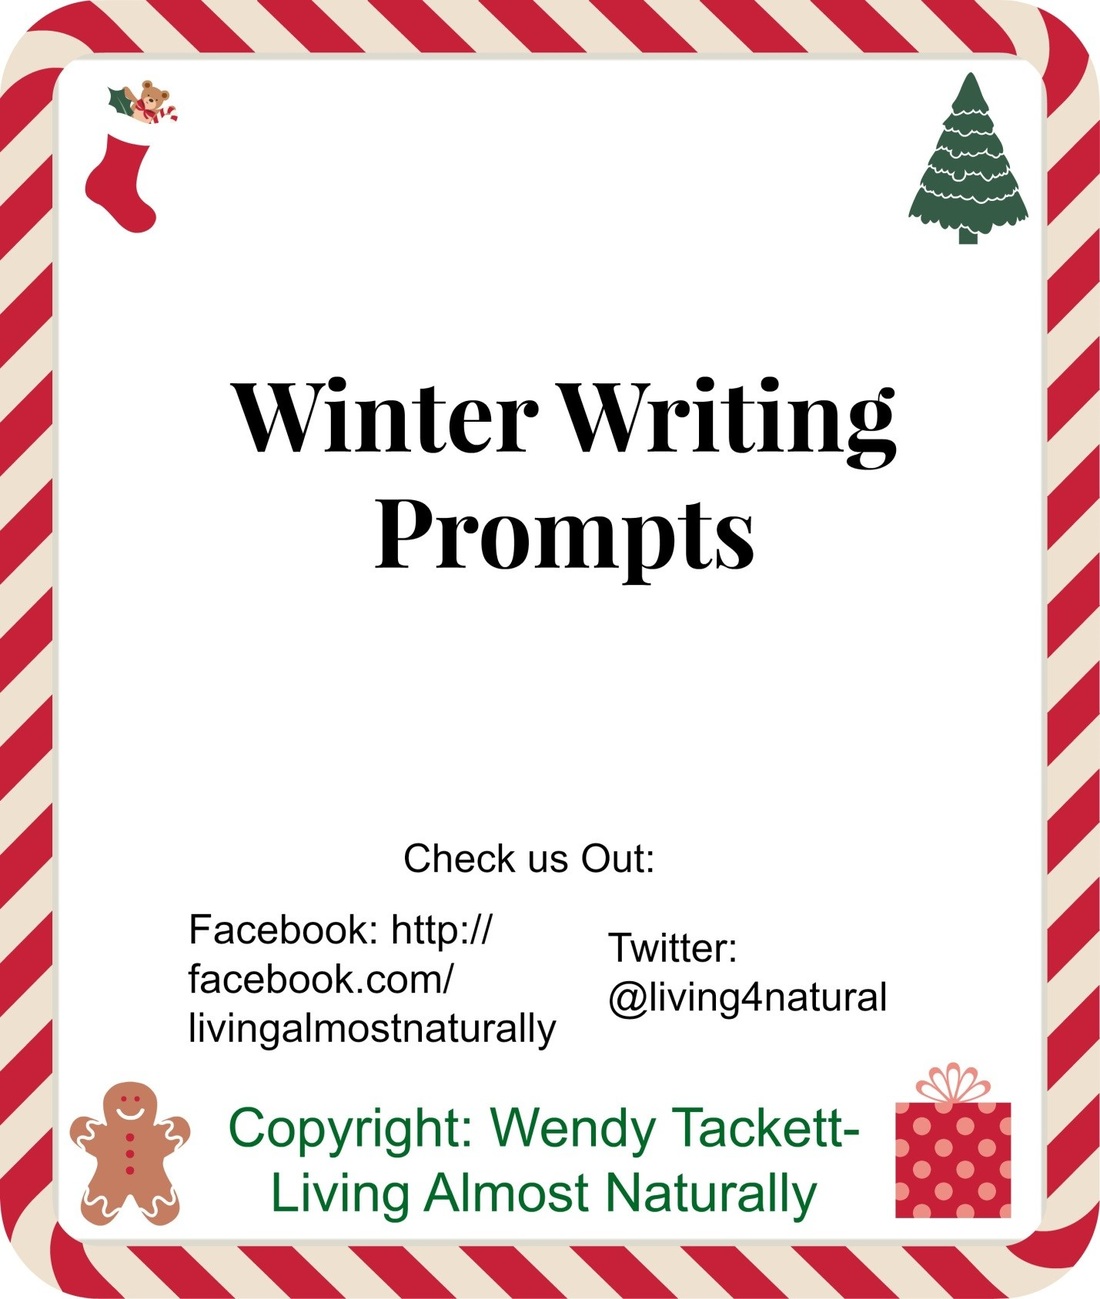 Winter Writing Prompts Packet- Free Download!